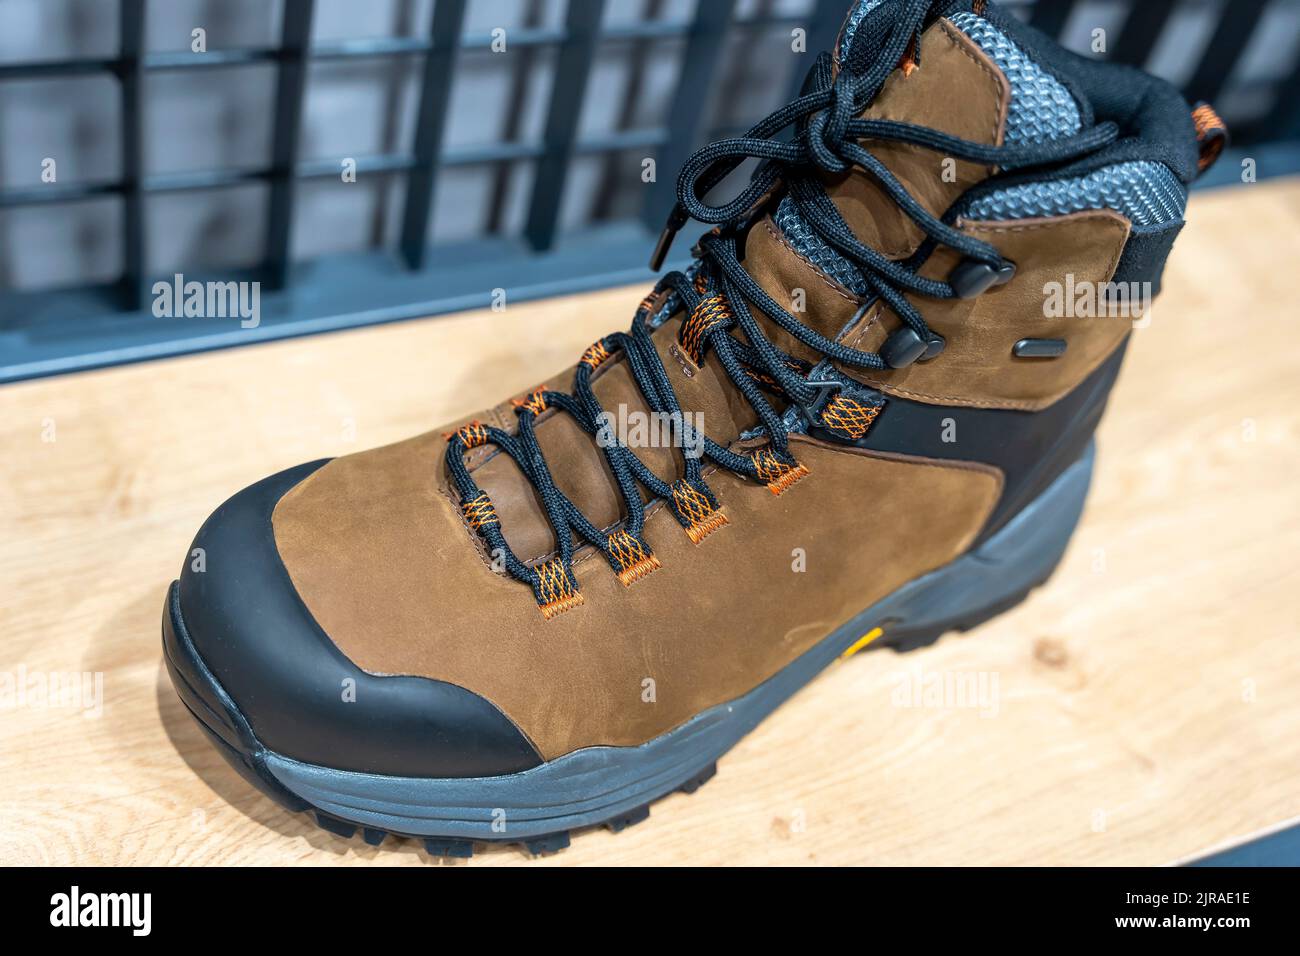 New Modern leather Mountain Boots with lacing close-up Stock Photo - Alamy